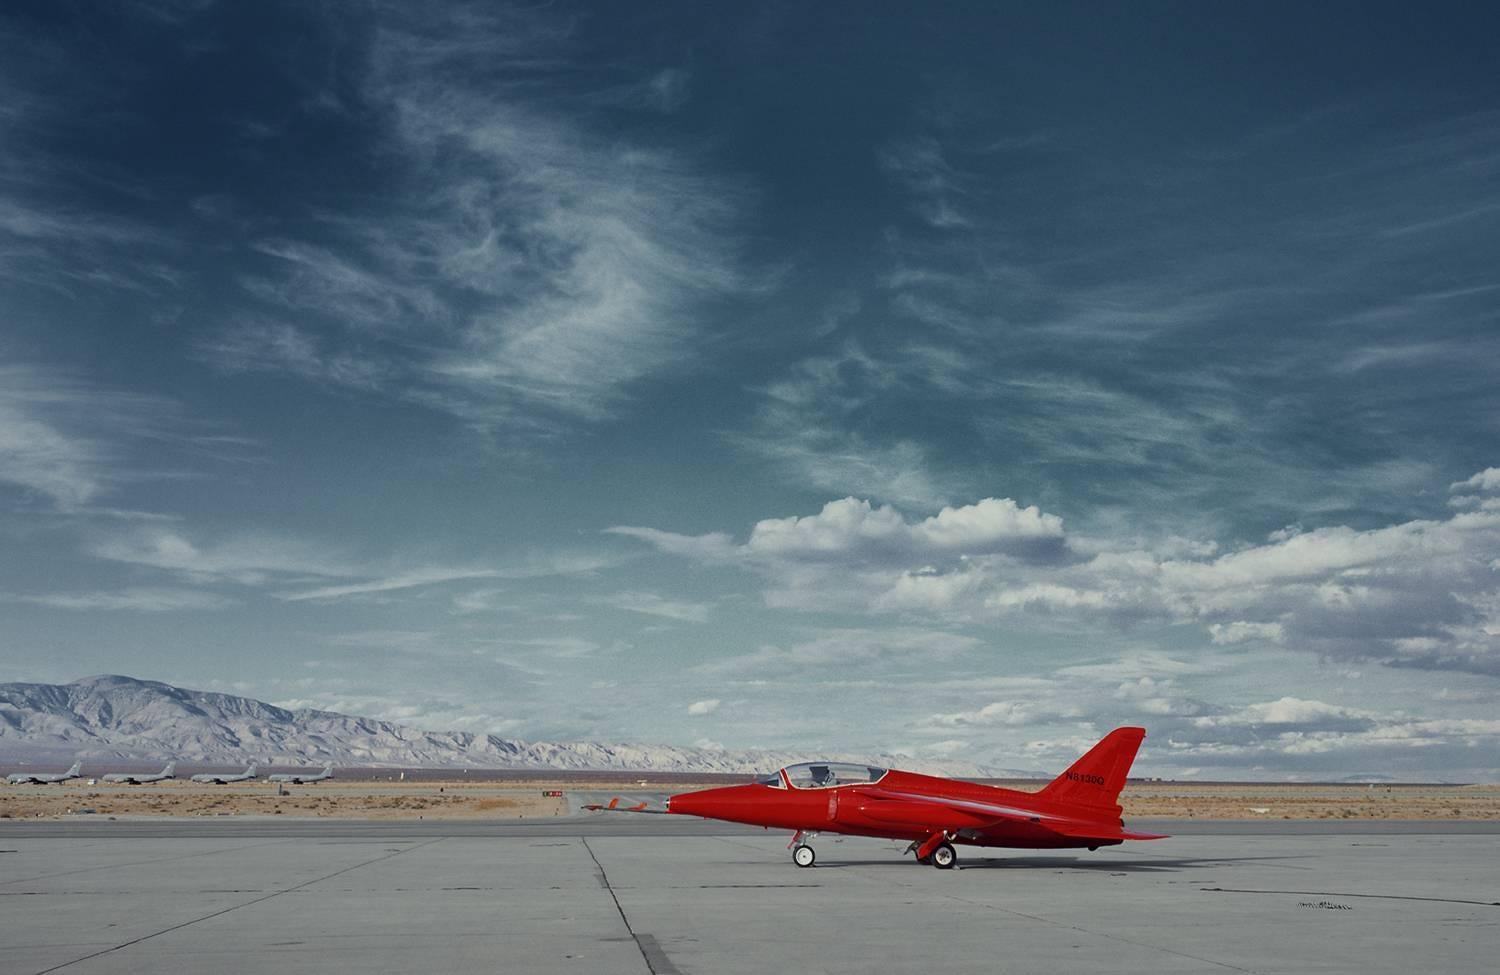 Red Jet - iconic vintage private jet plane on desert airport tarmac (48 x 74")